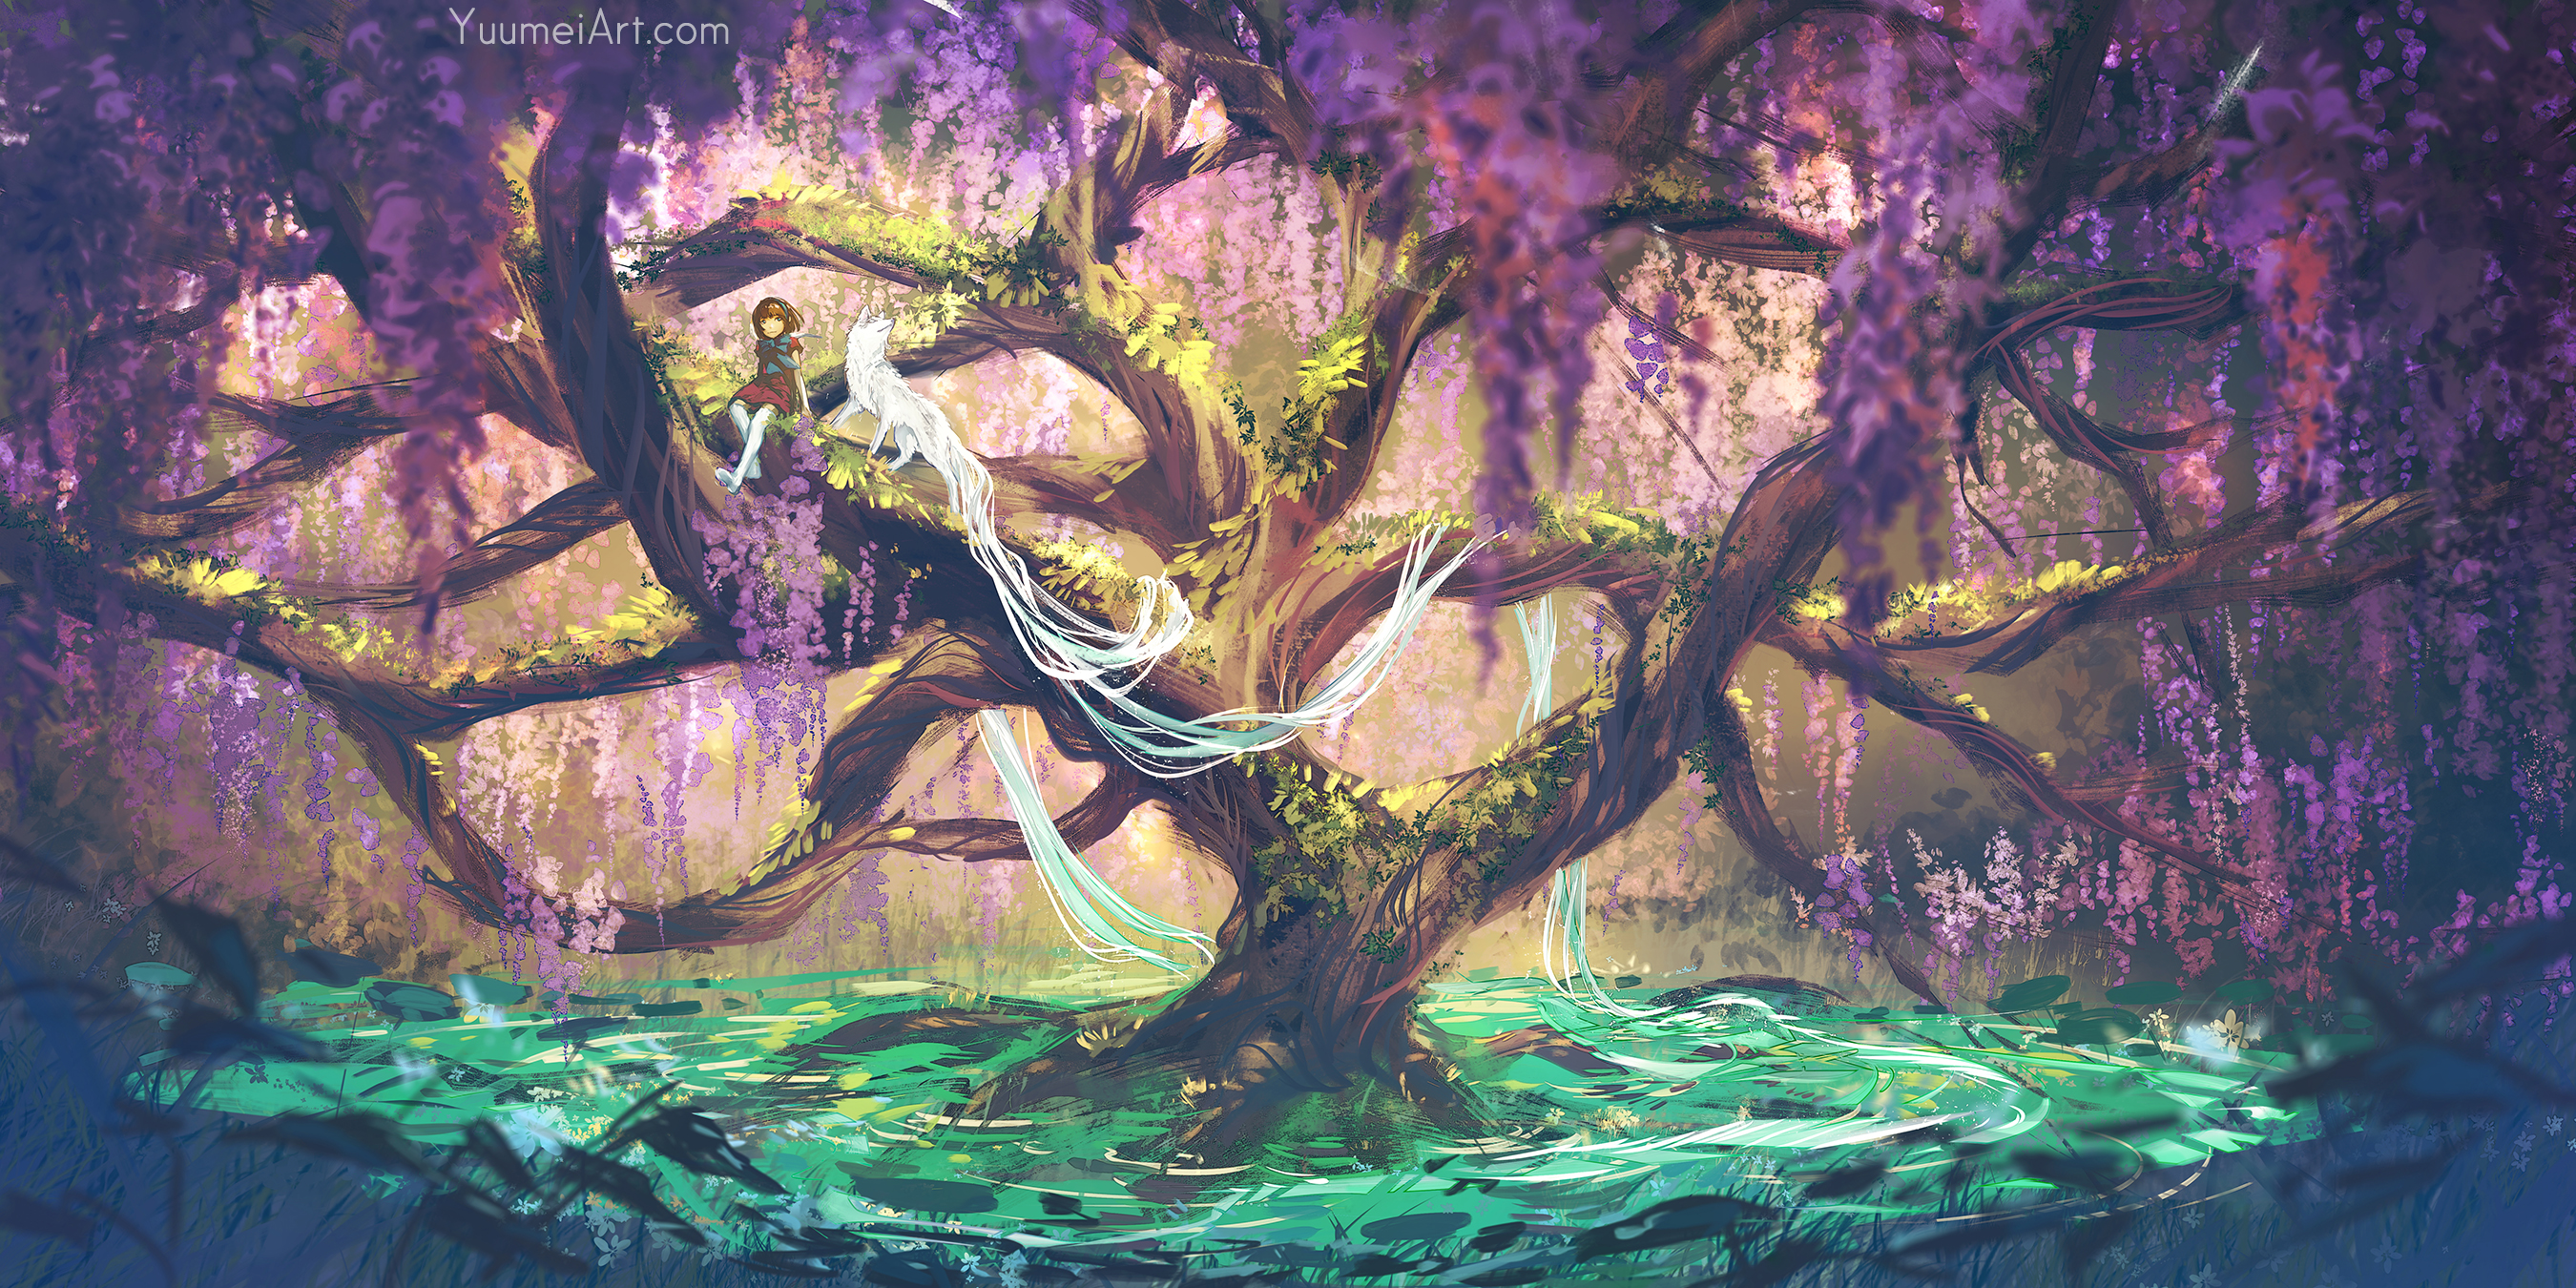 Anime 2700x1350 Yuumei drawing nature trees fantasy art children overgrown moss flowers